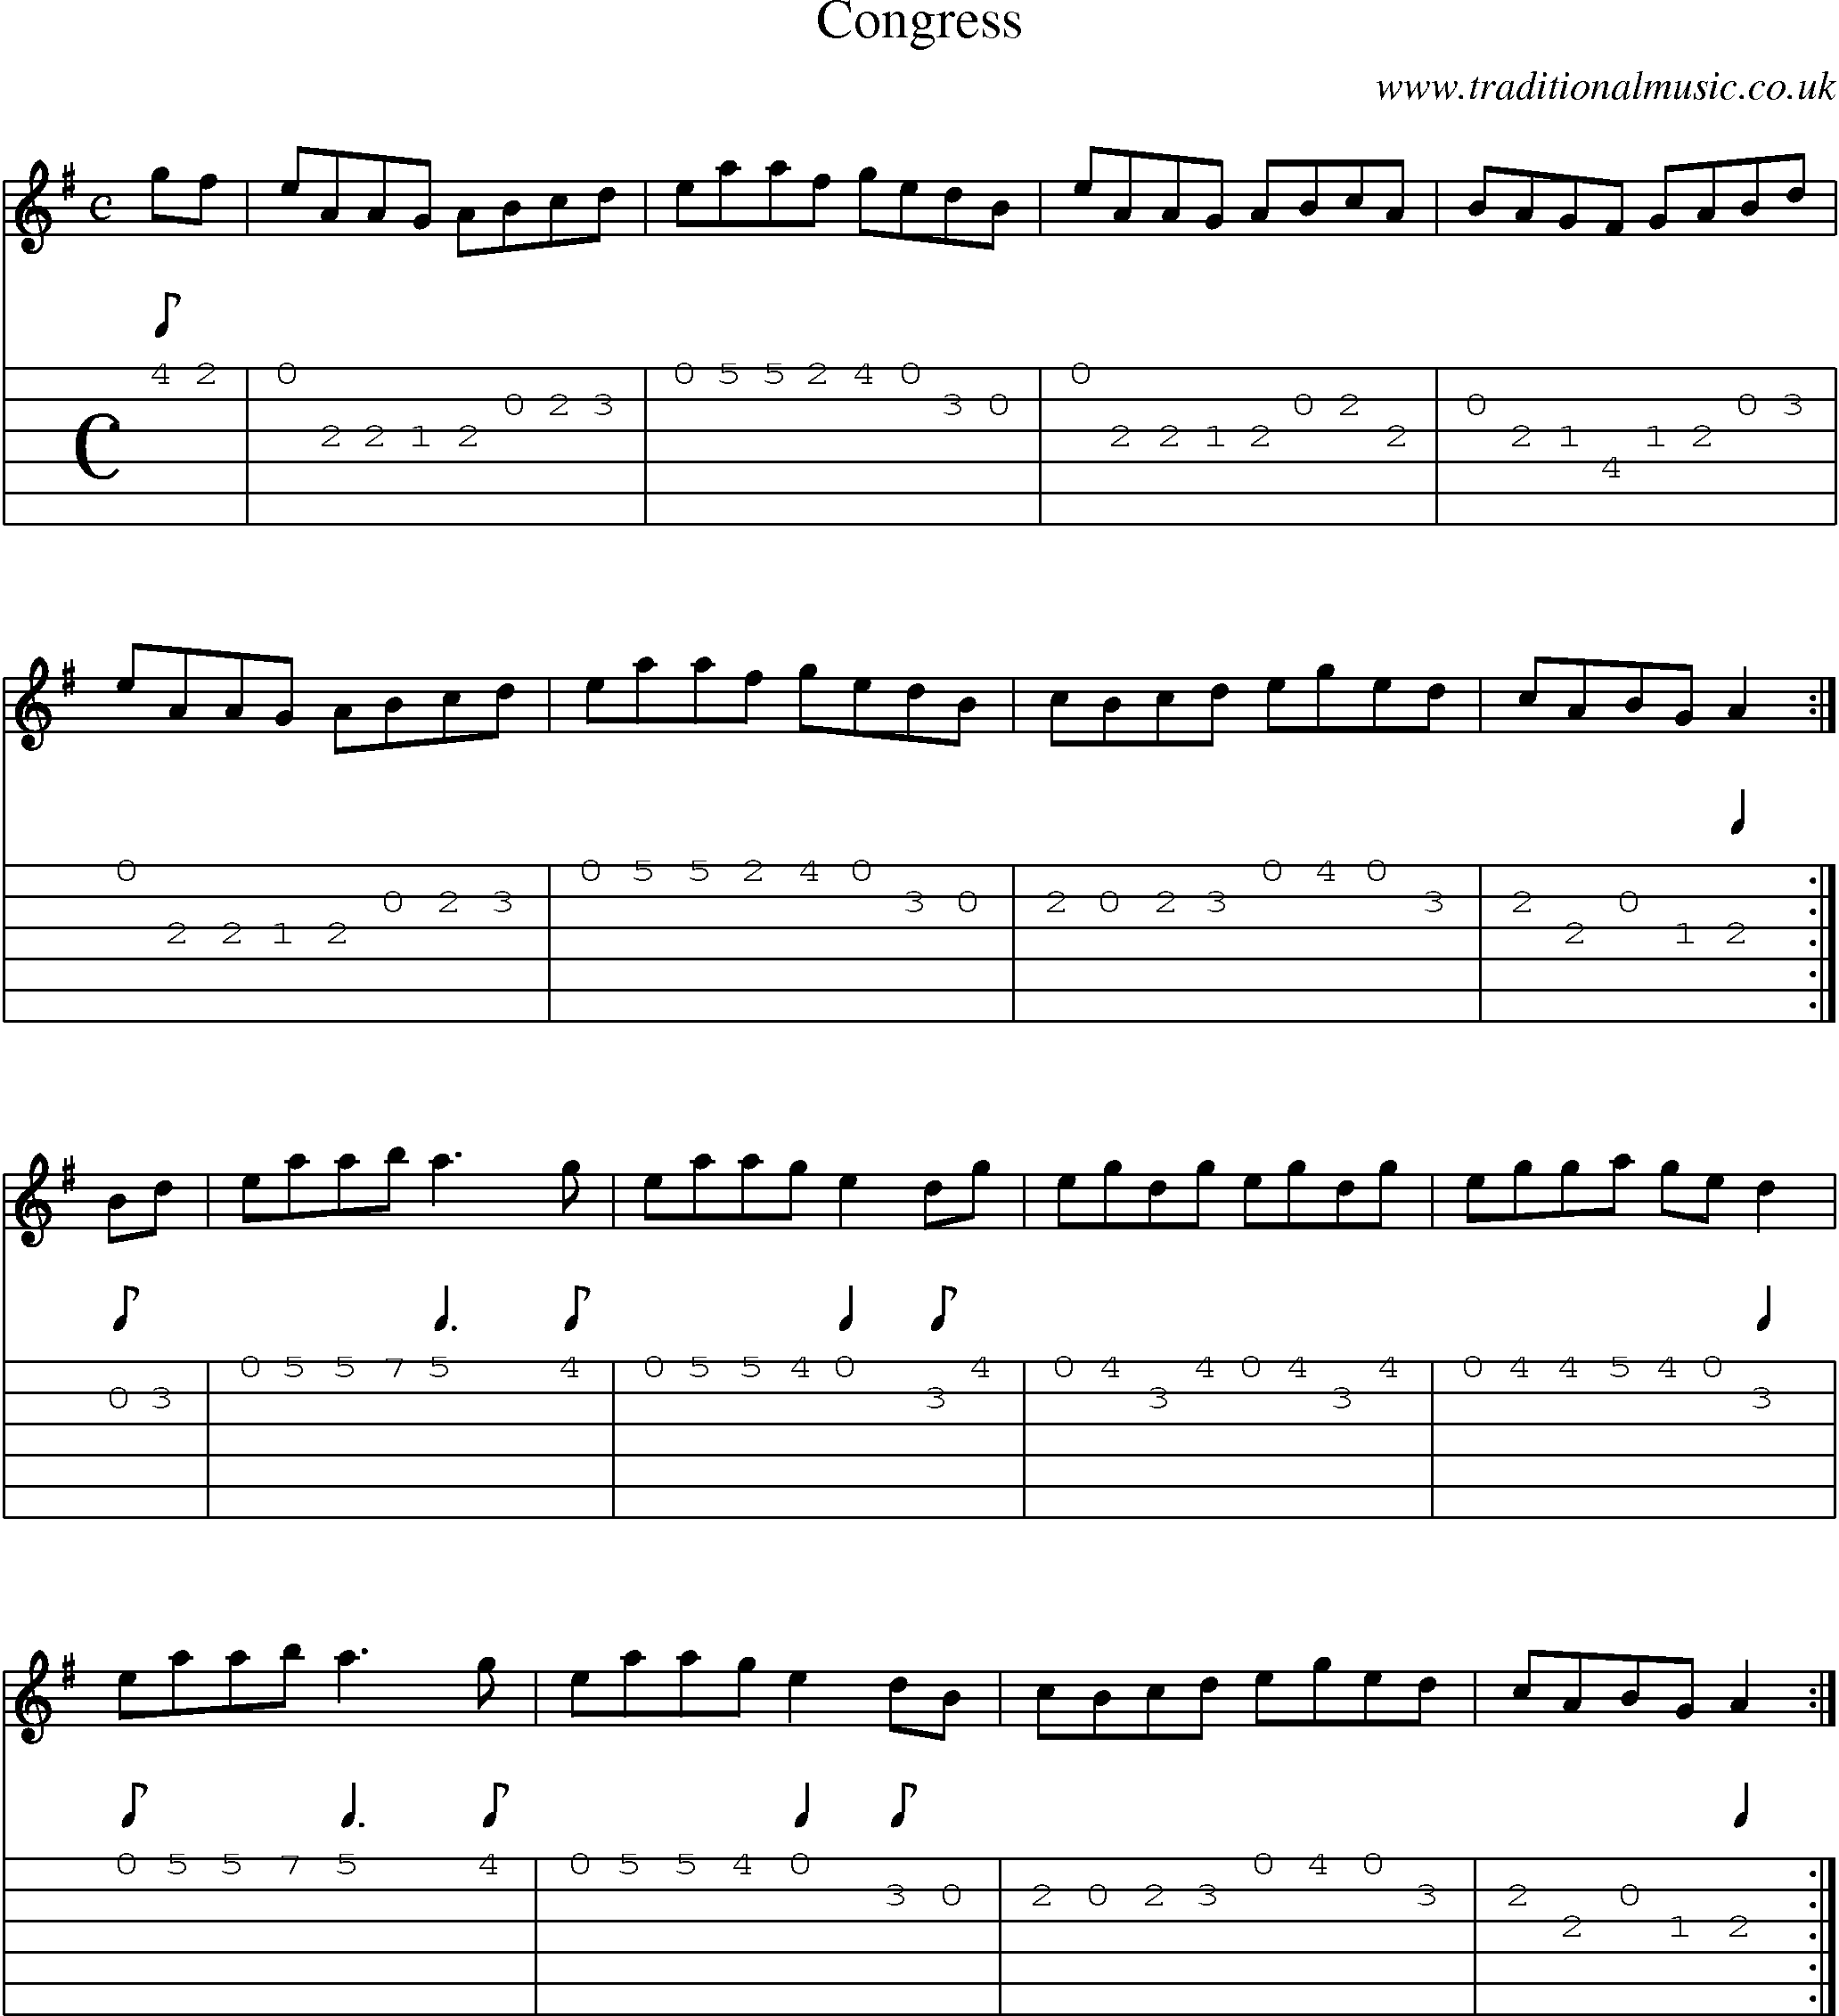 Music Score and Guitar Tabs for Congress